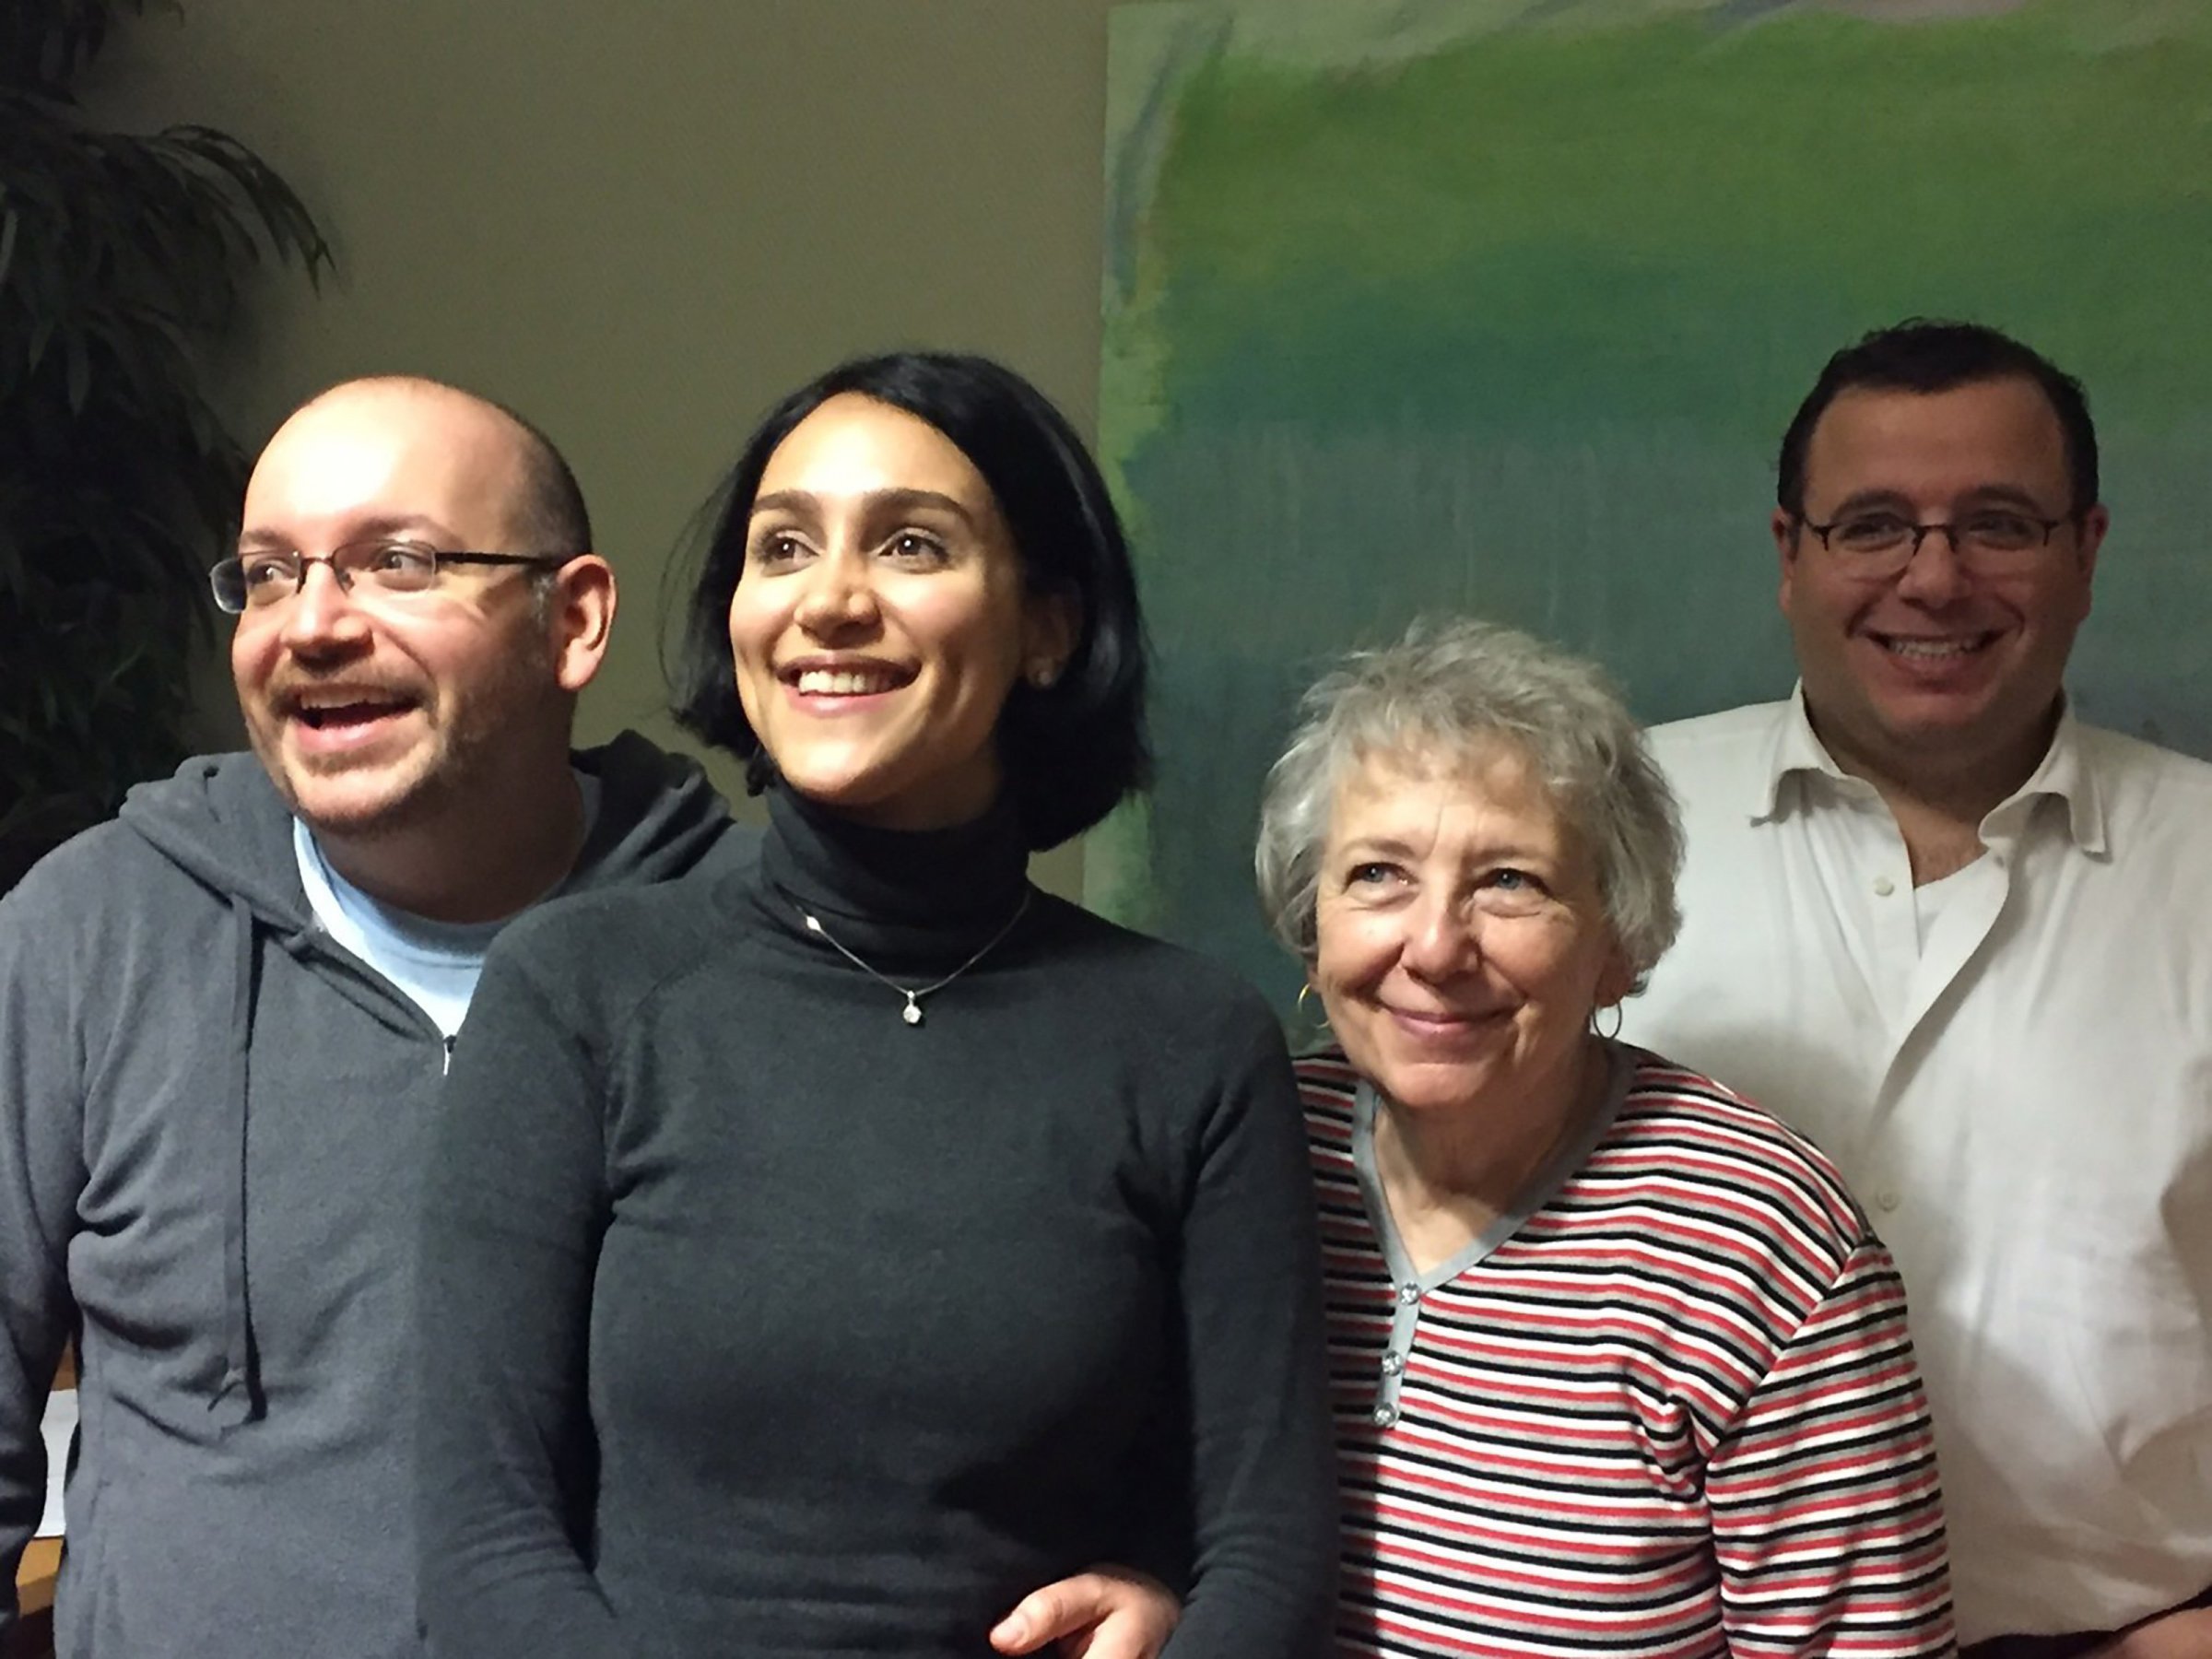 Washington Post journalist Jason Rezaian (left), freed after 18 months of incarceration in an Iranian prison, reunites with his wife Yeganeh Salehi, mother Mary Rezaian and brother Ali Rezaian, on Jan. 18, 2016.